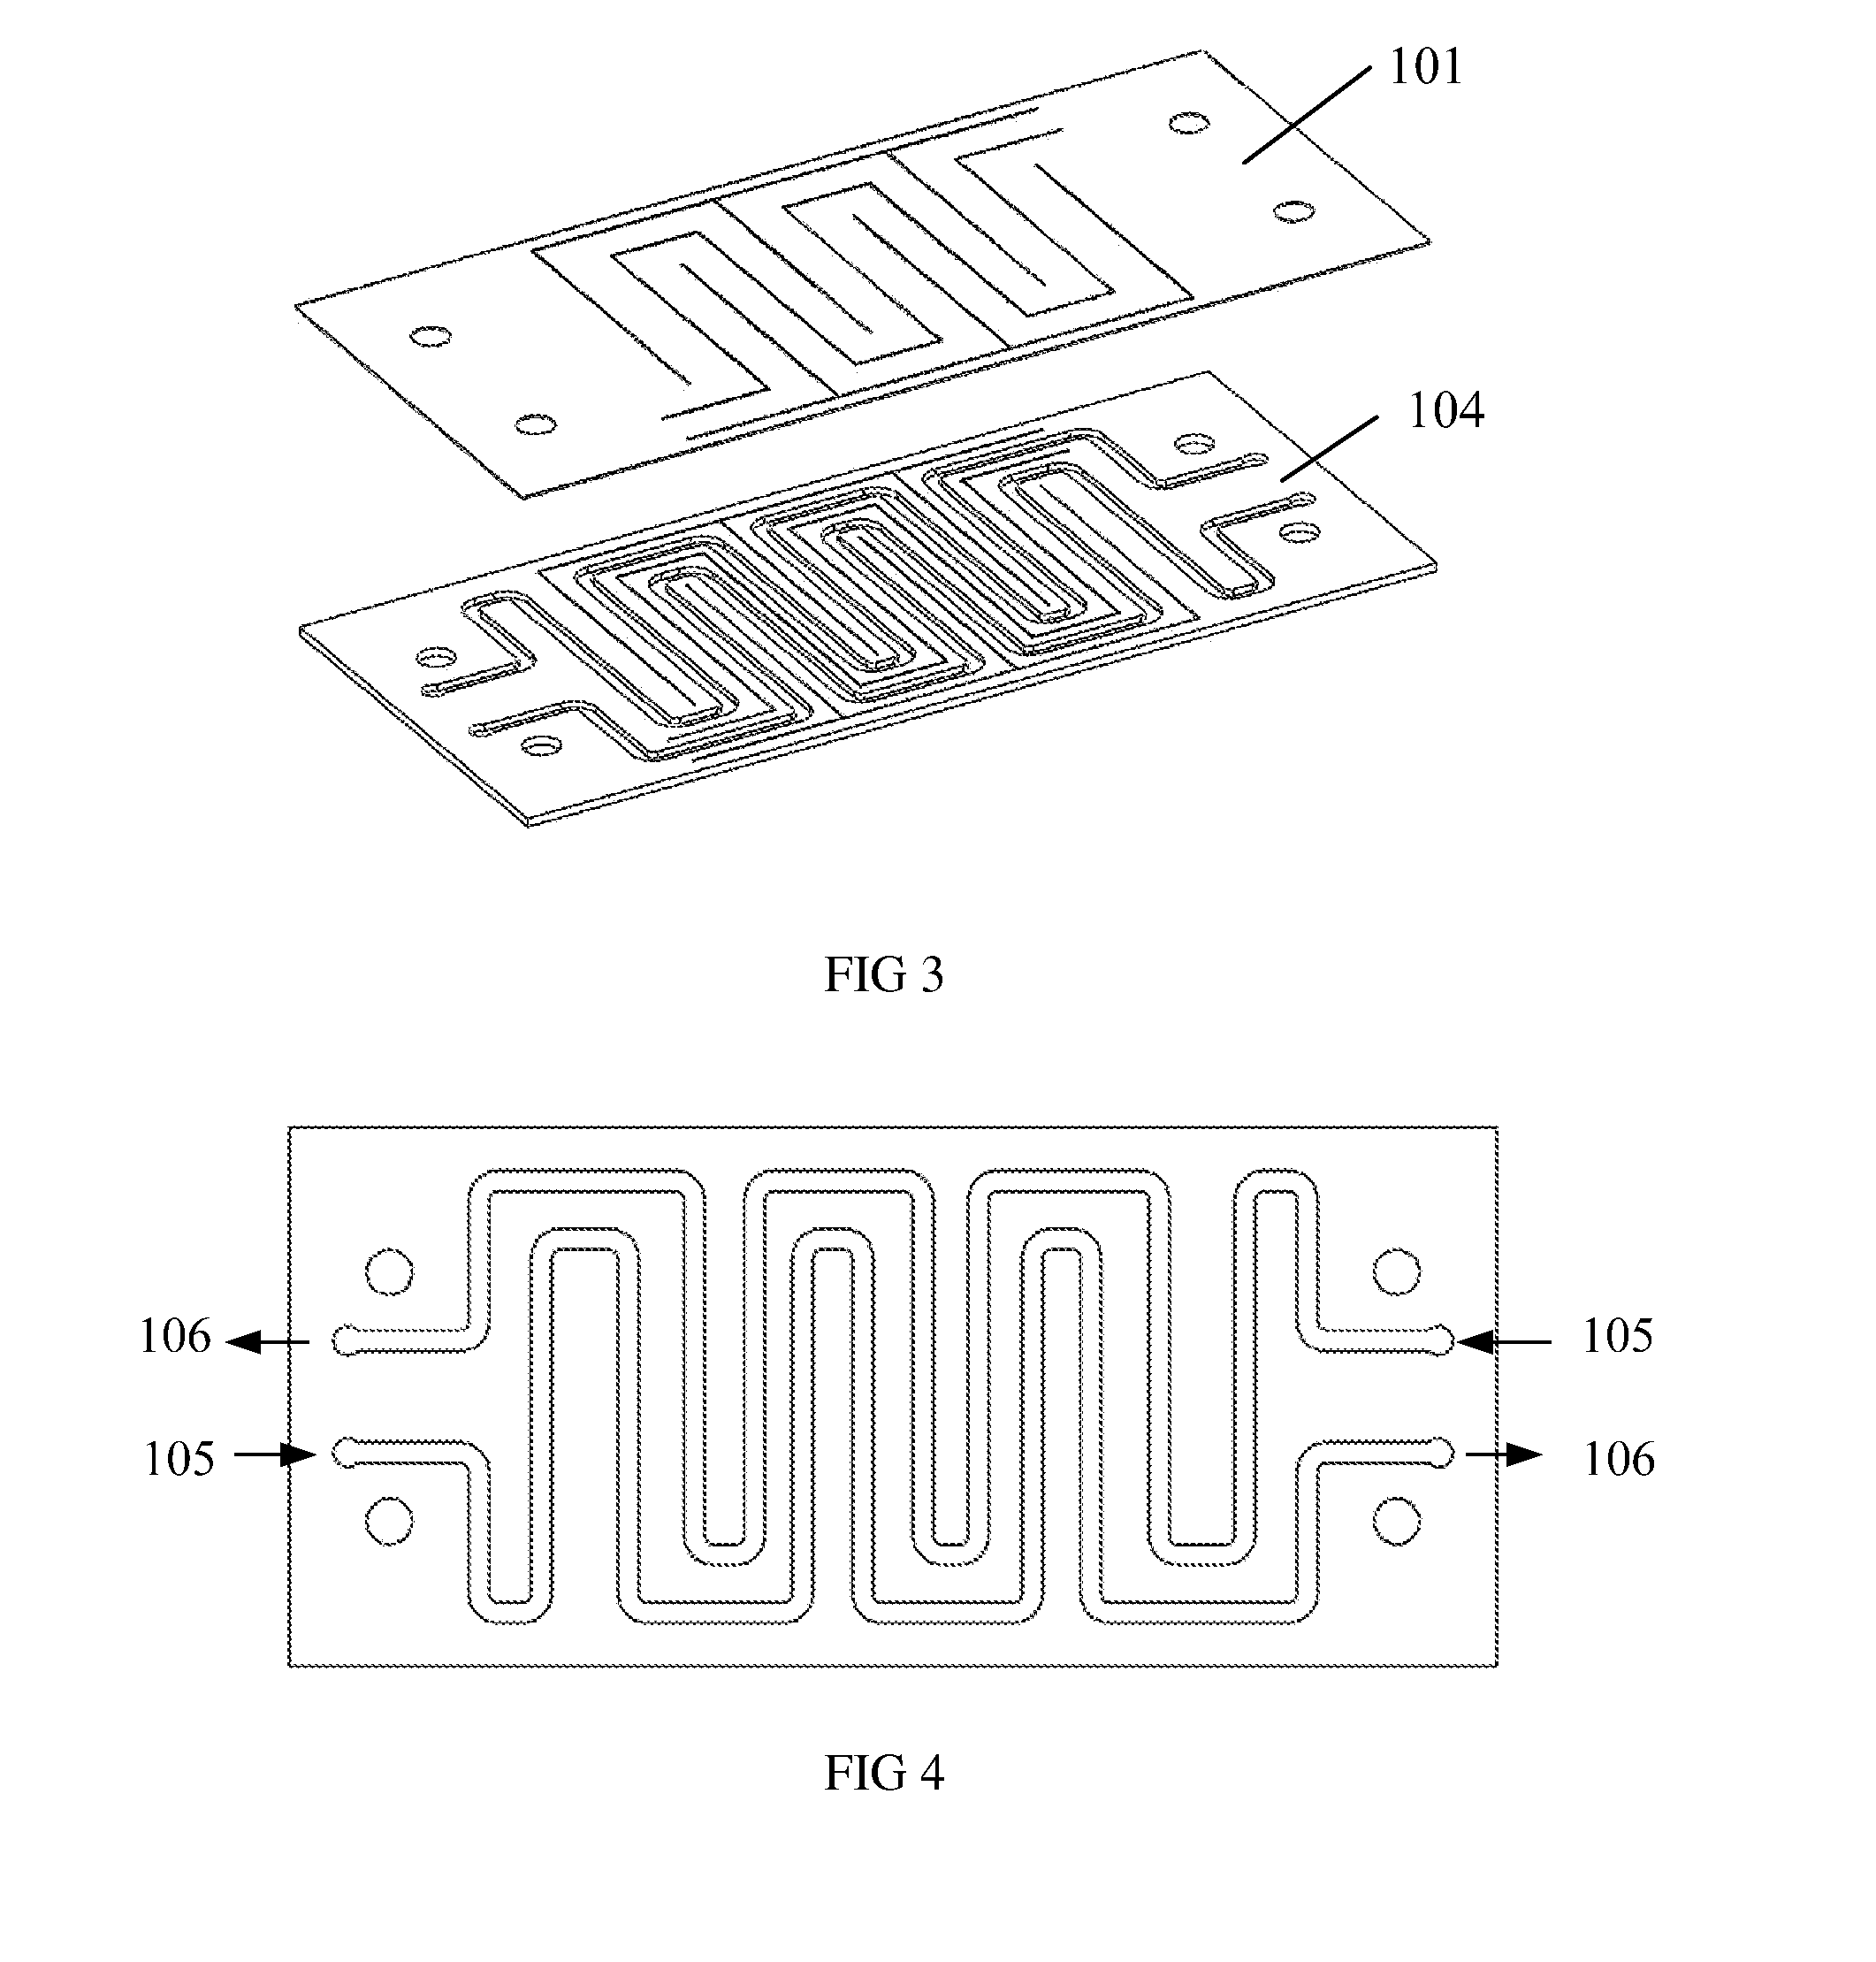 Motor cooling and eddy current suppression structure